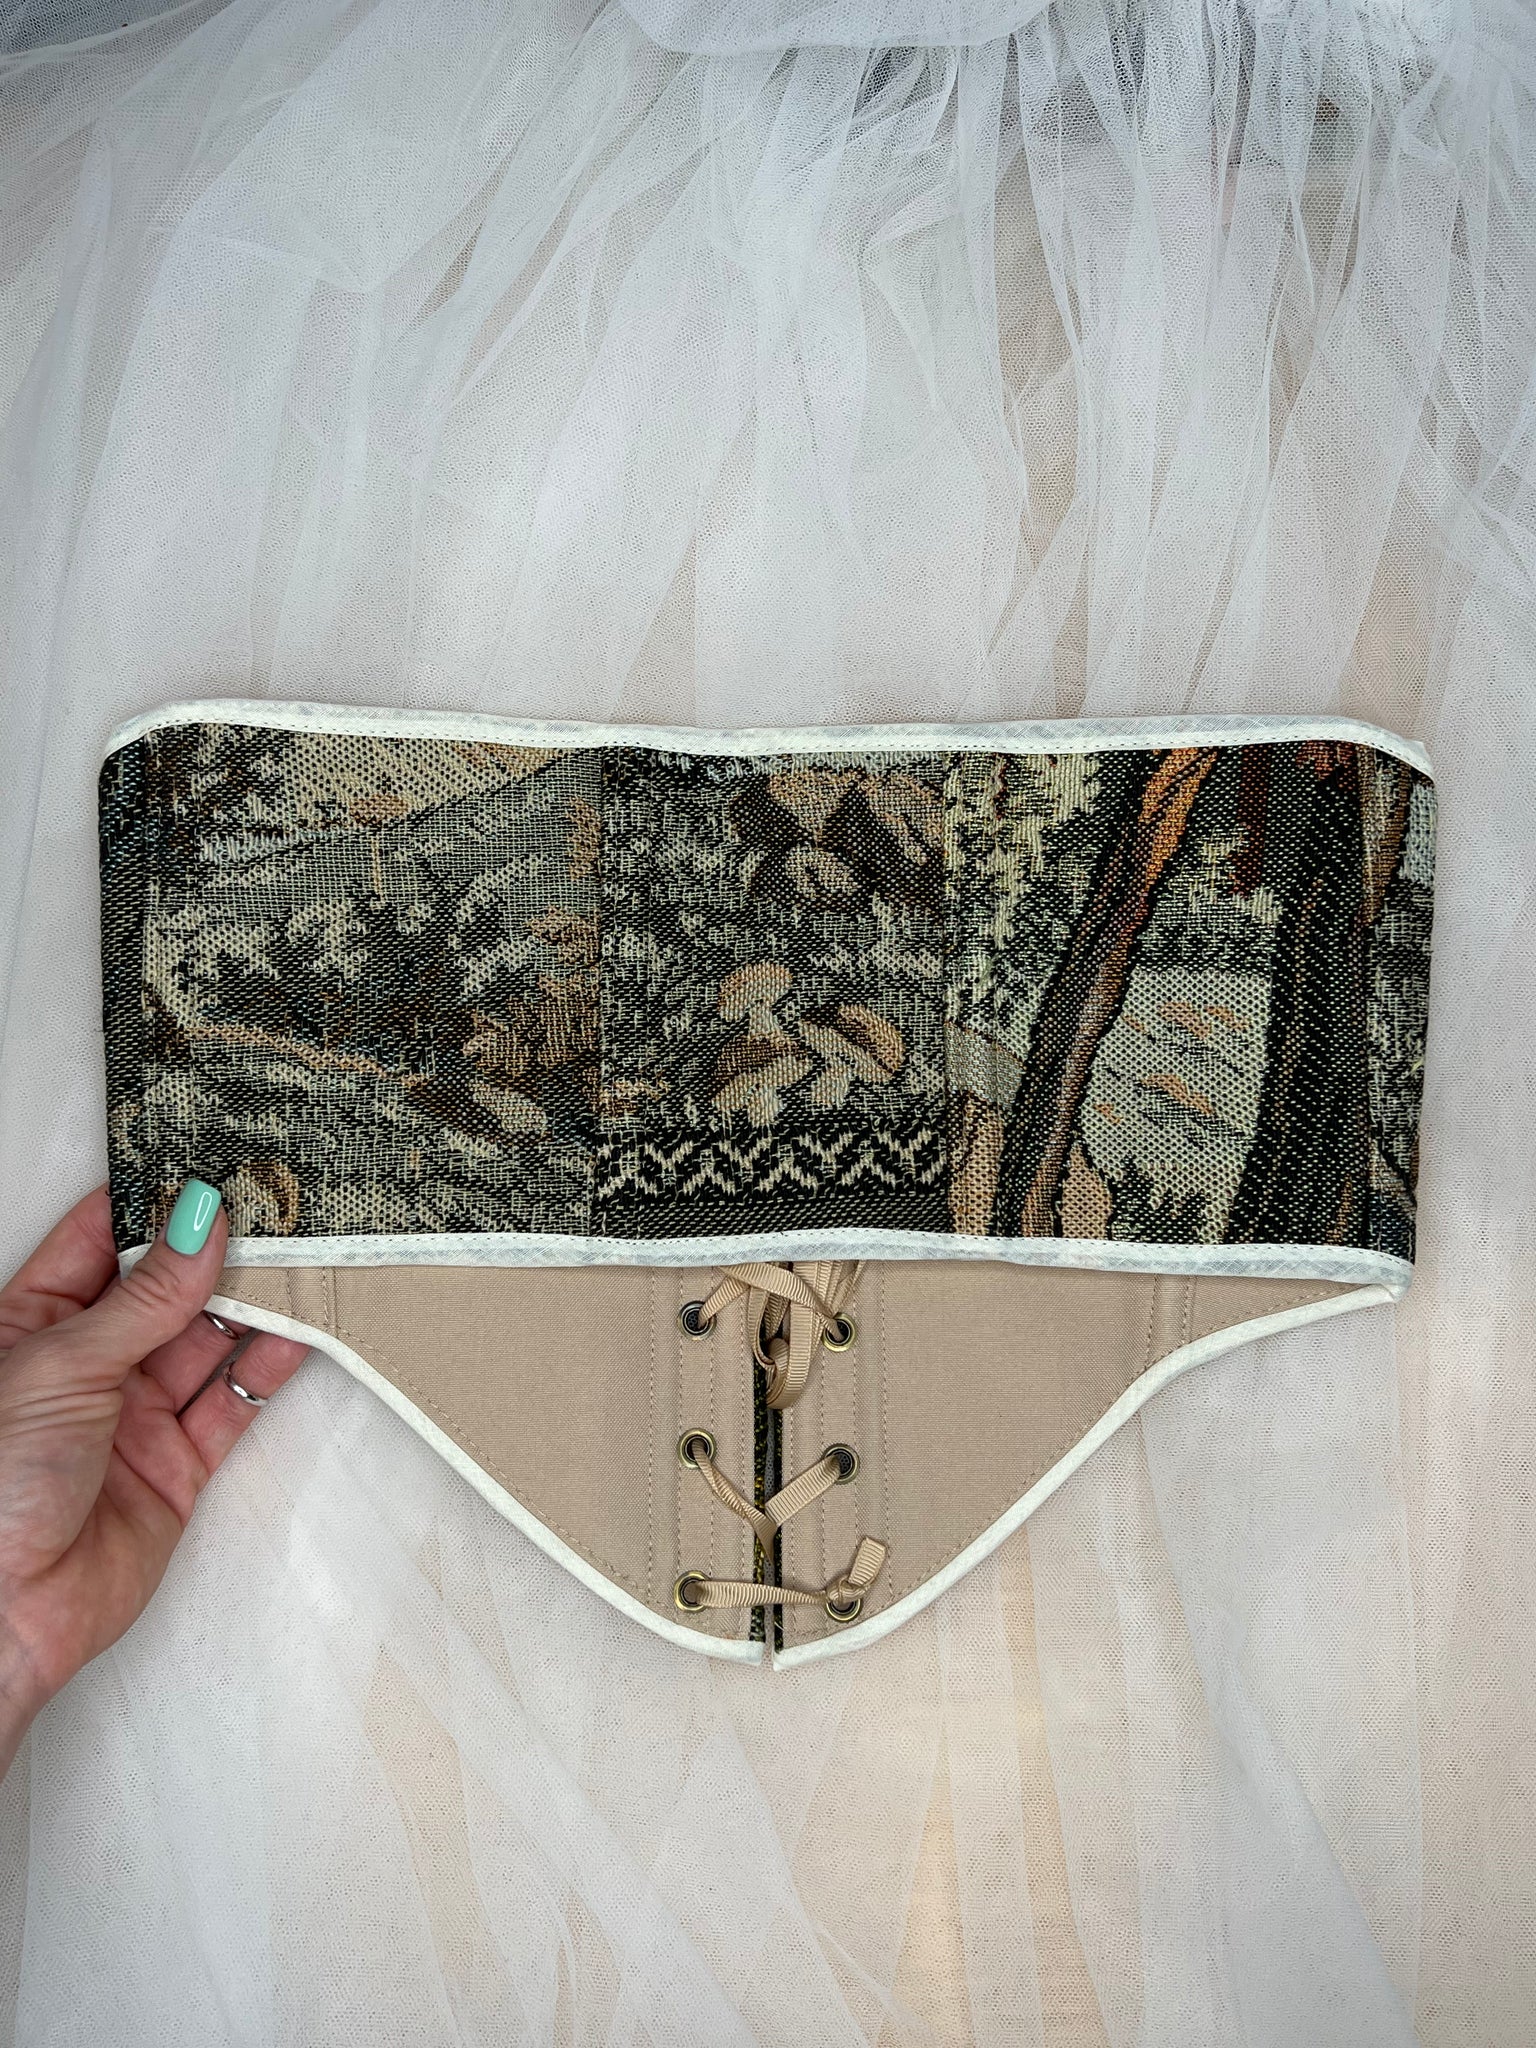 NEW Vintage Tapestry Lace-up Corset Belt, “Forest Sunset” pattern, Size S-M (US 2-8)